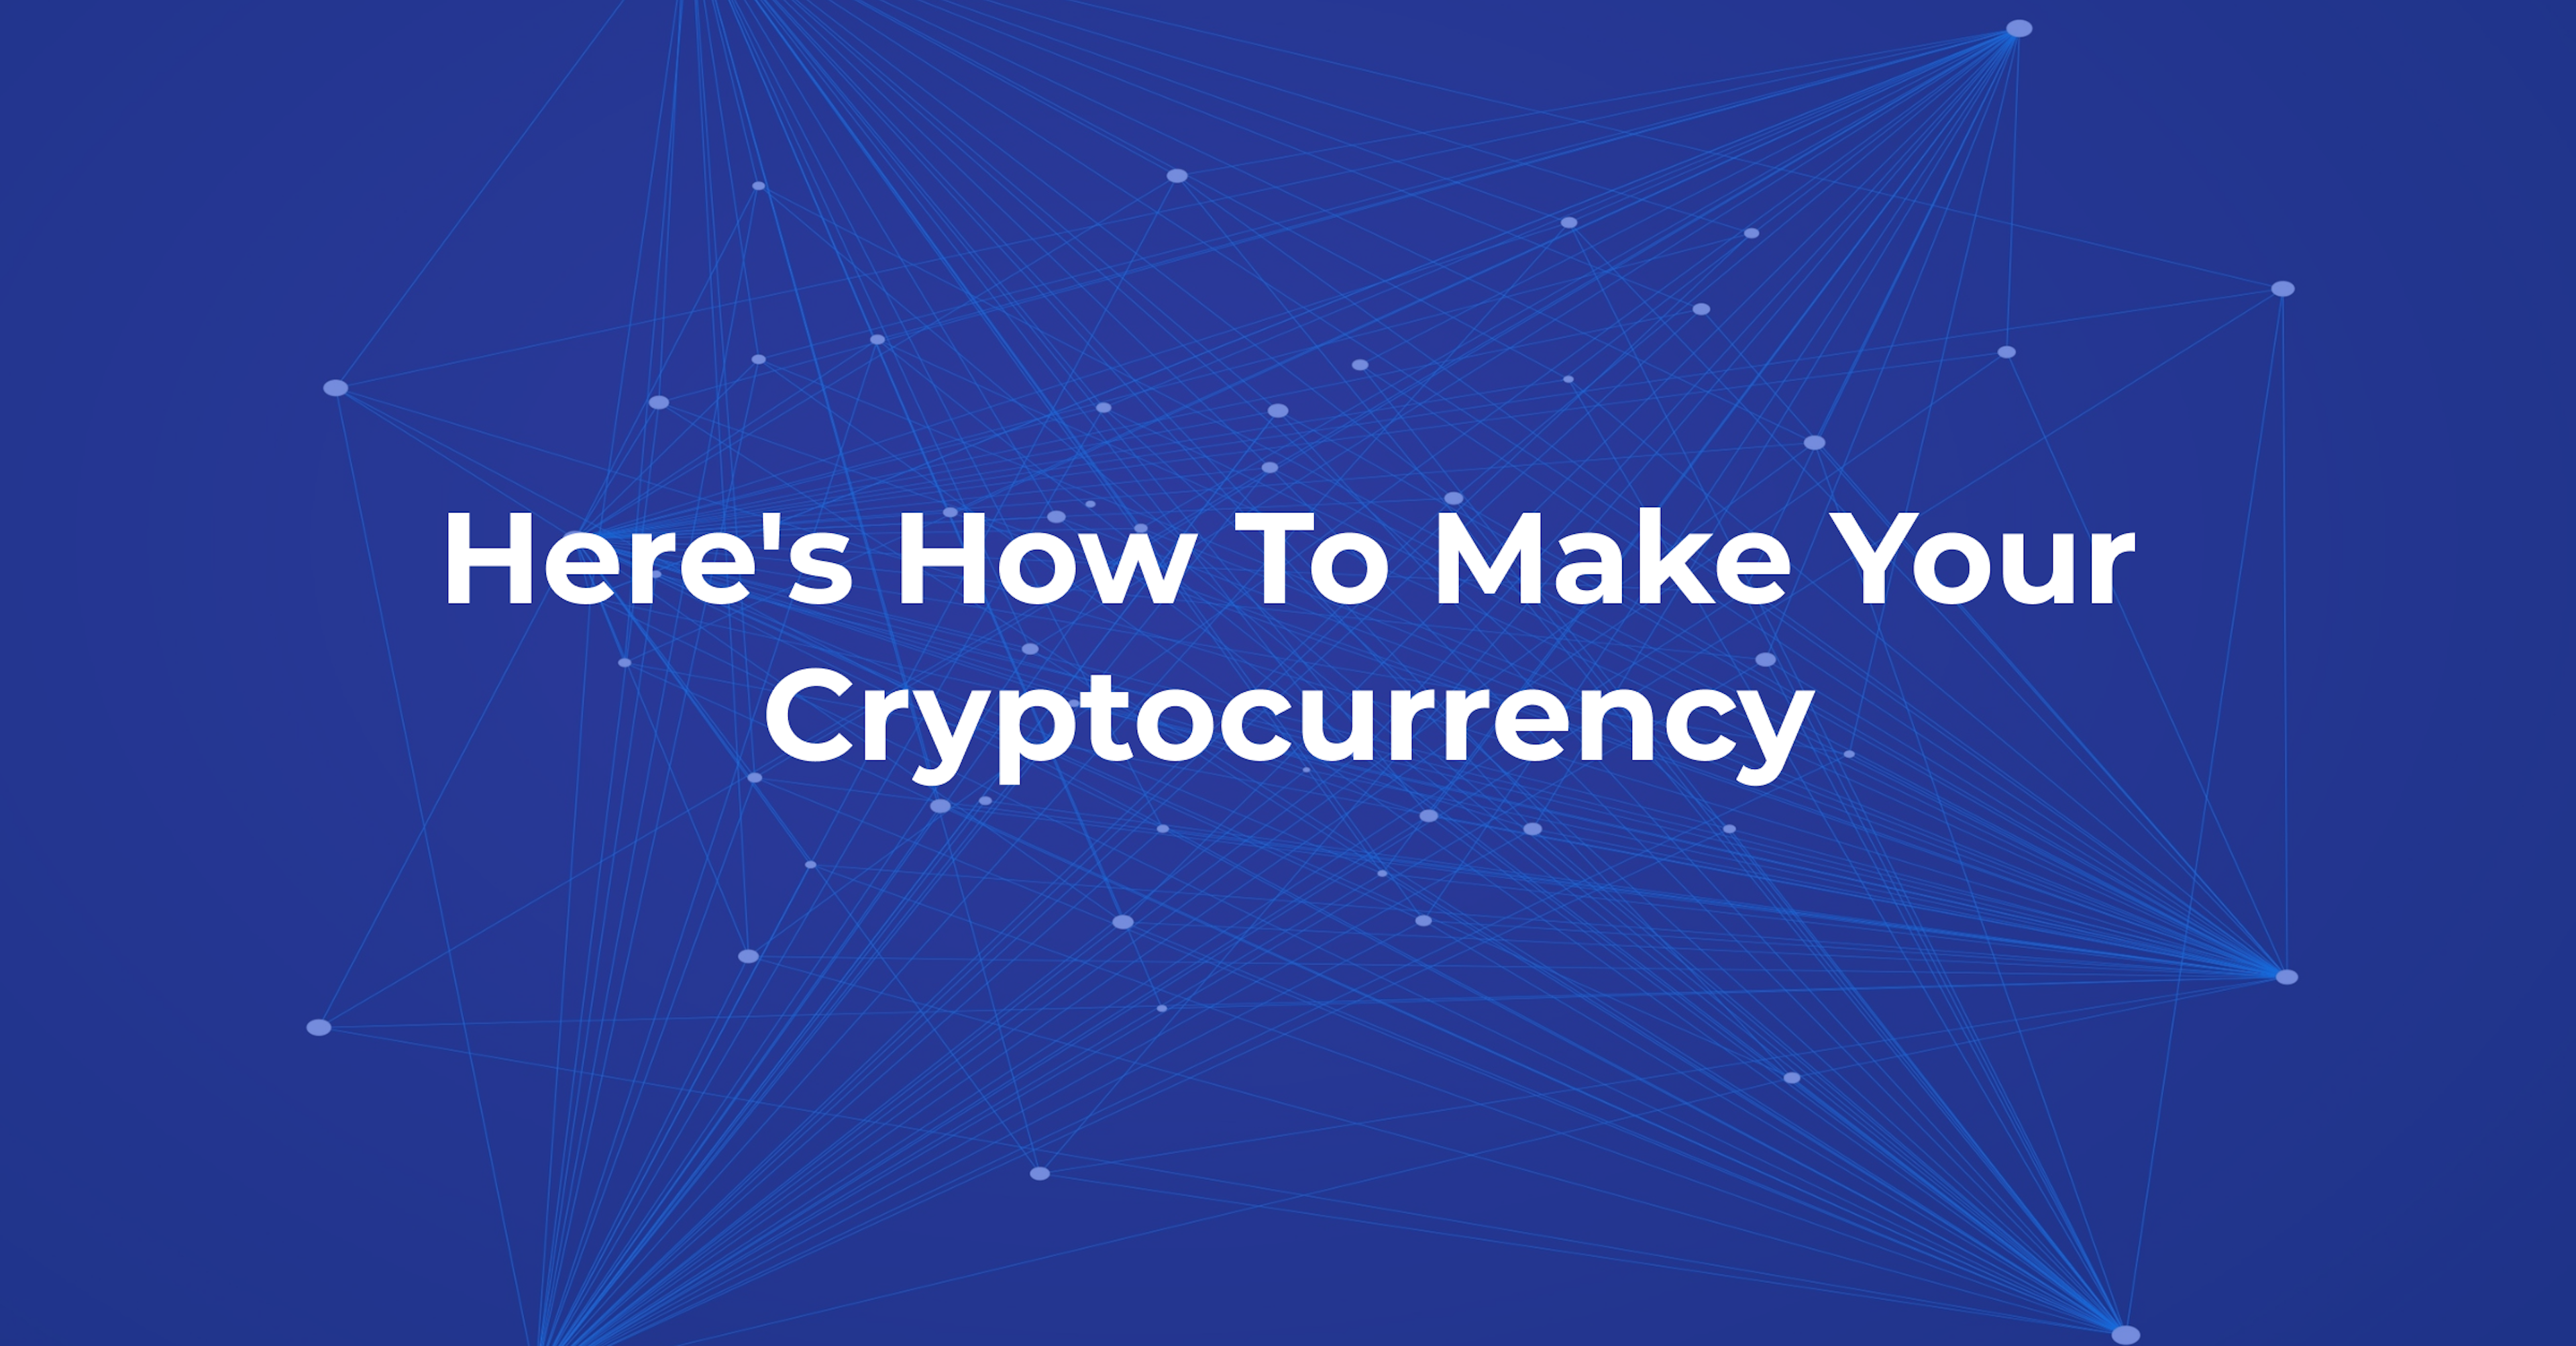 Here's How To Make Your Cryptocurrency | Blockchain Works